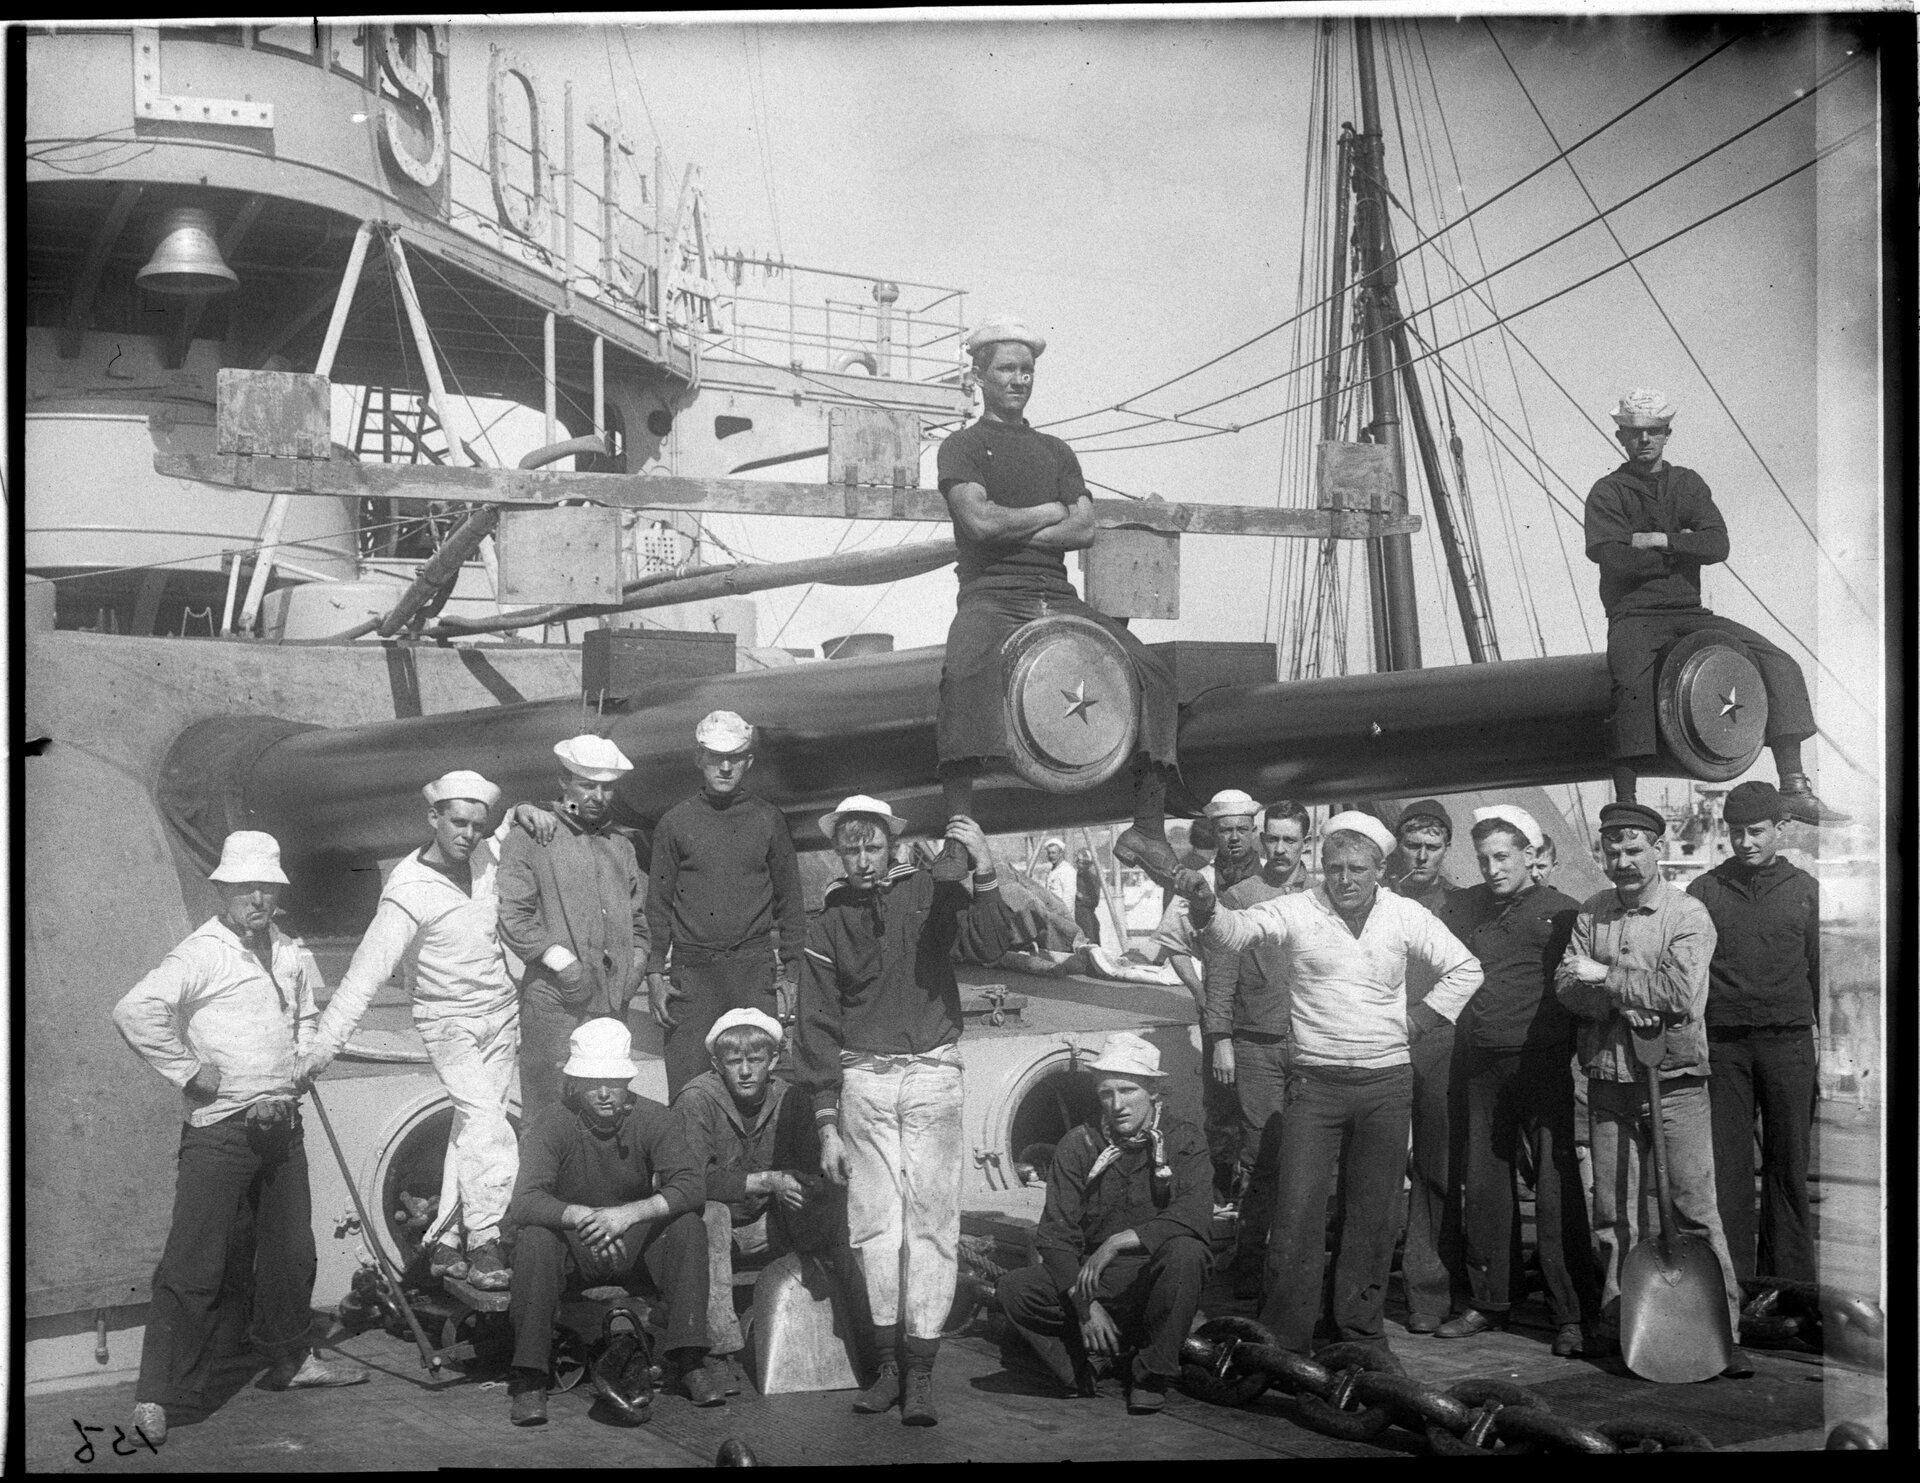  A group of sailors pose casually in front of a ship, leaning against and sitting on top of the cannons